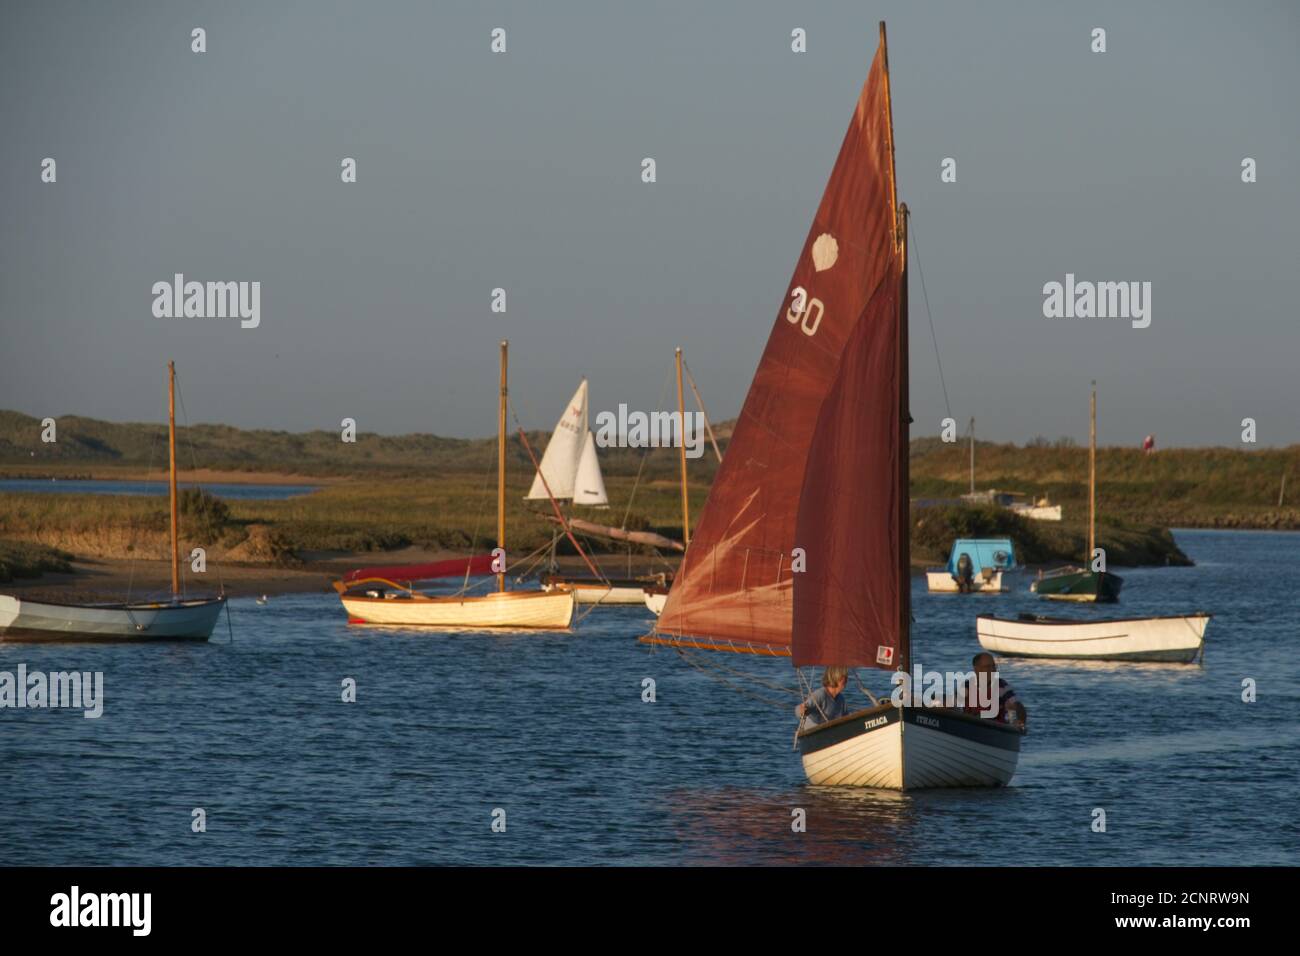 Traditional sail boat under sail in estuary among boats at moorings.  Plain grey sky. Boats moored in background. Landscape format. Stock Photo